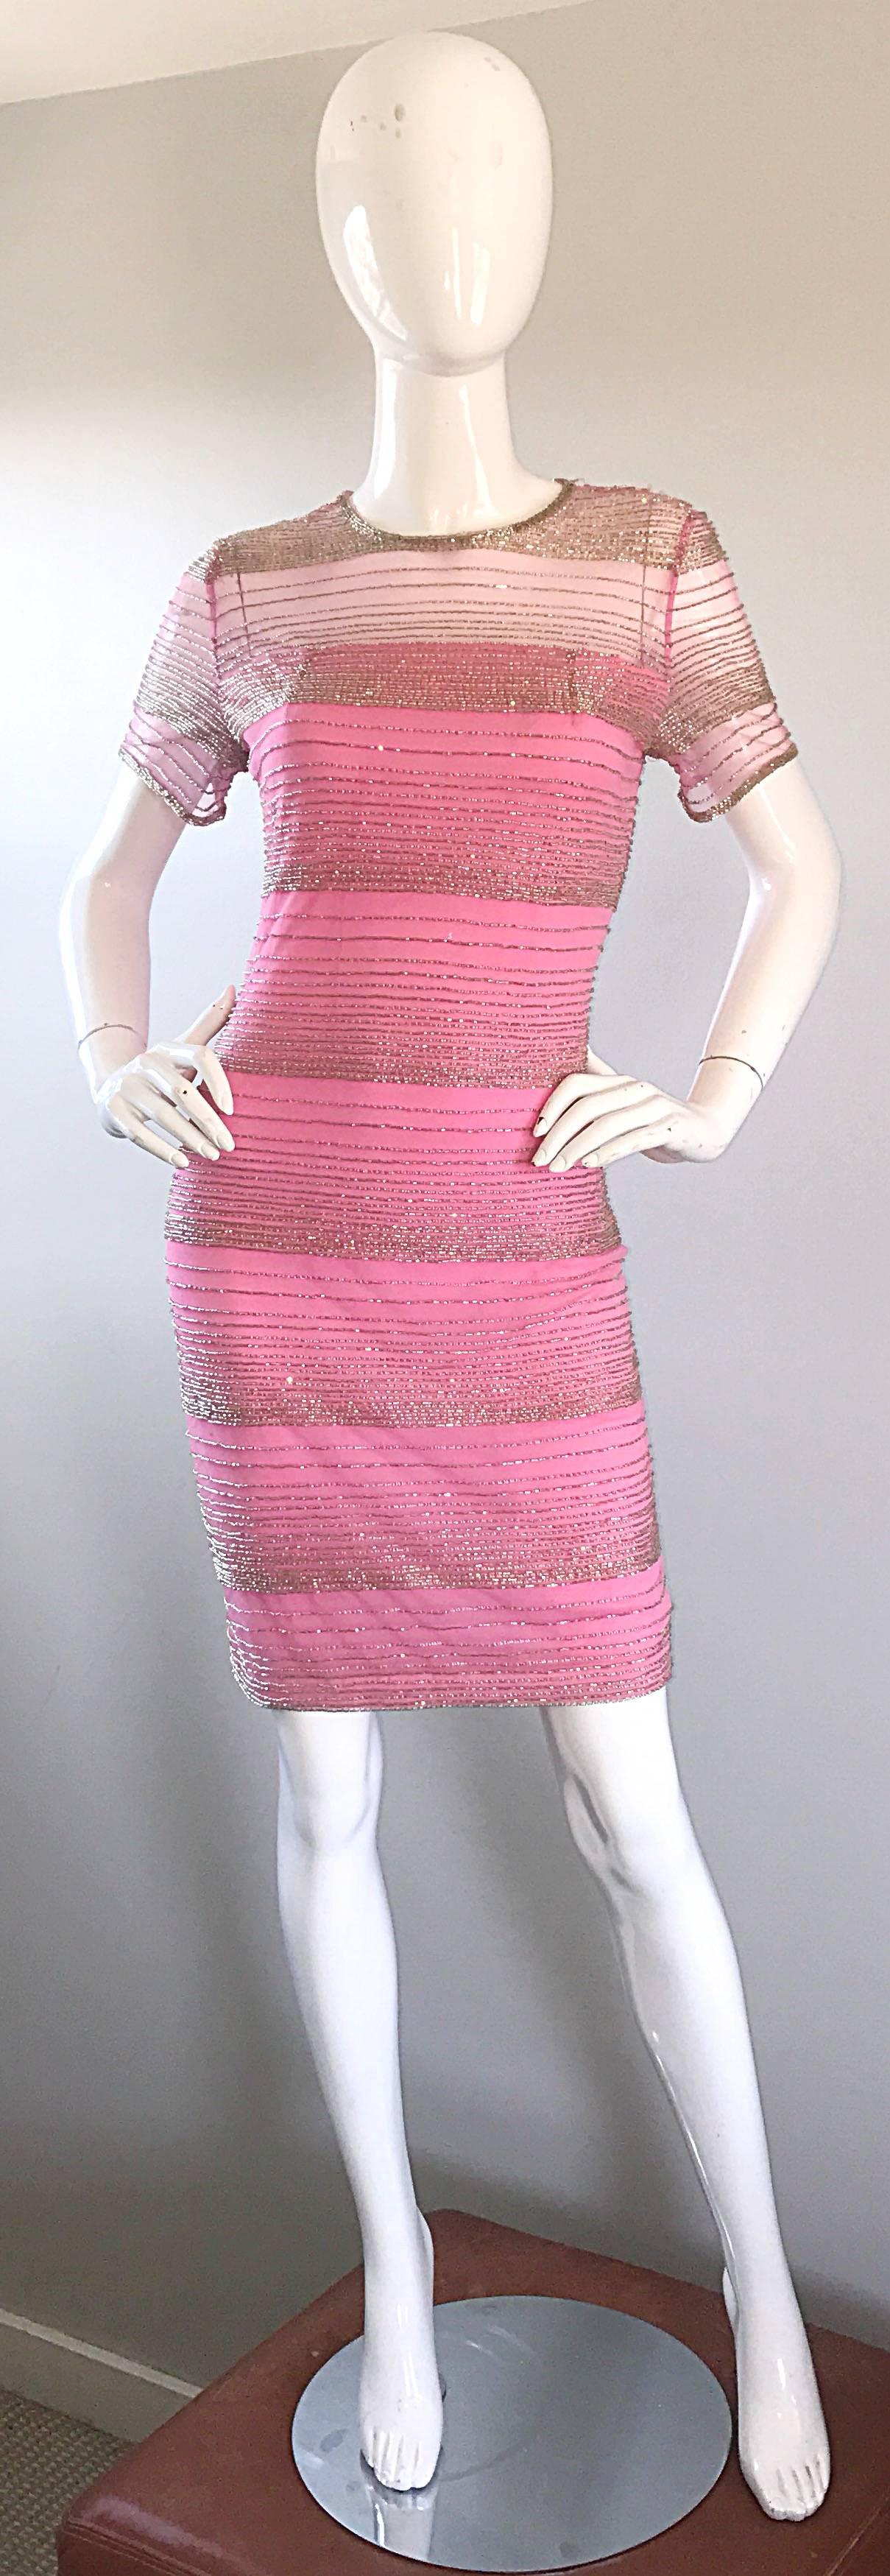 Beautiful vintage OLEG CASSINI bubblegum pink and silver silk beaded short sleeve cocktail dress! Wonderful tailored fit looks fantastic on! Features thousands of hand sewn silver beads throughout the entire dress. Semi sheer silk above the bust.